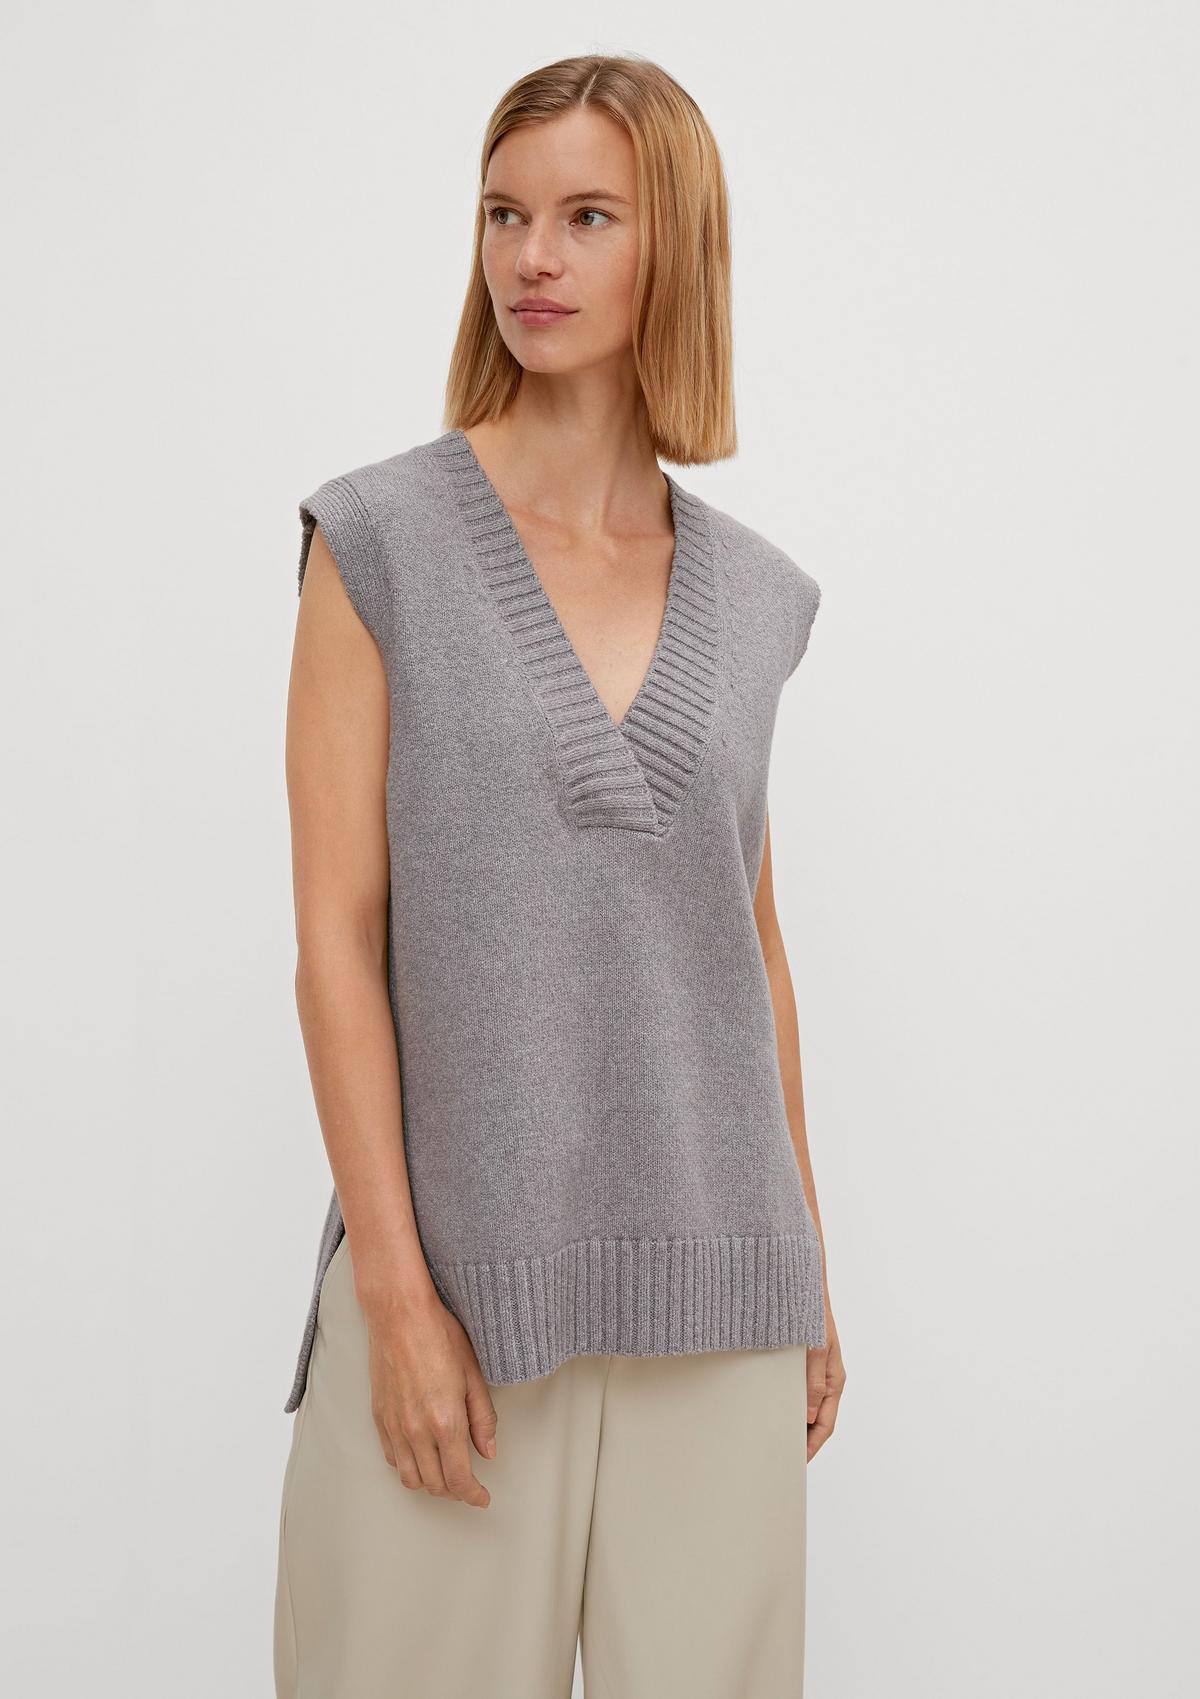 Sleeveless jumper with a percentage of wool